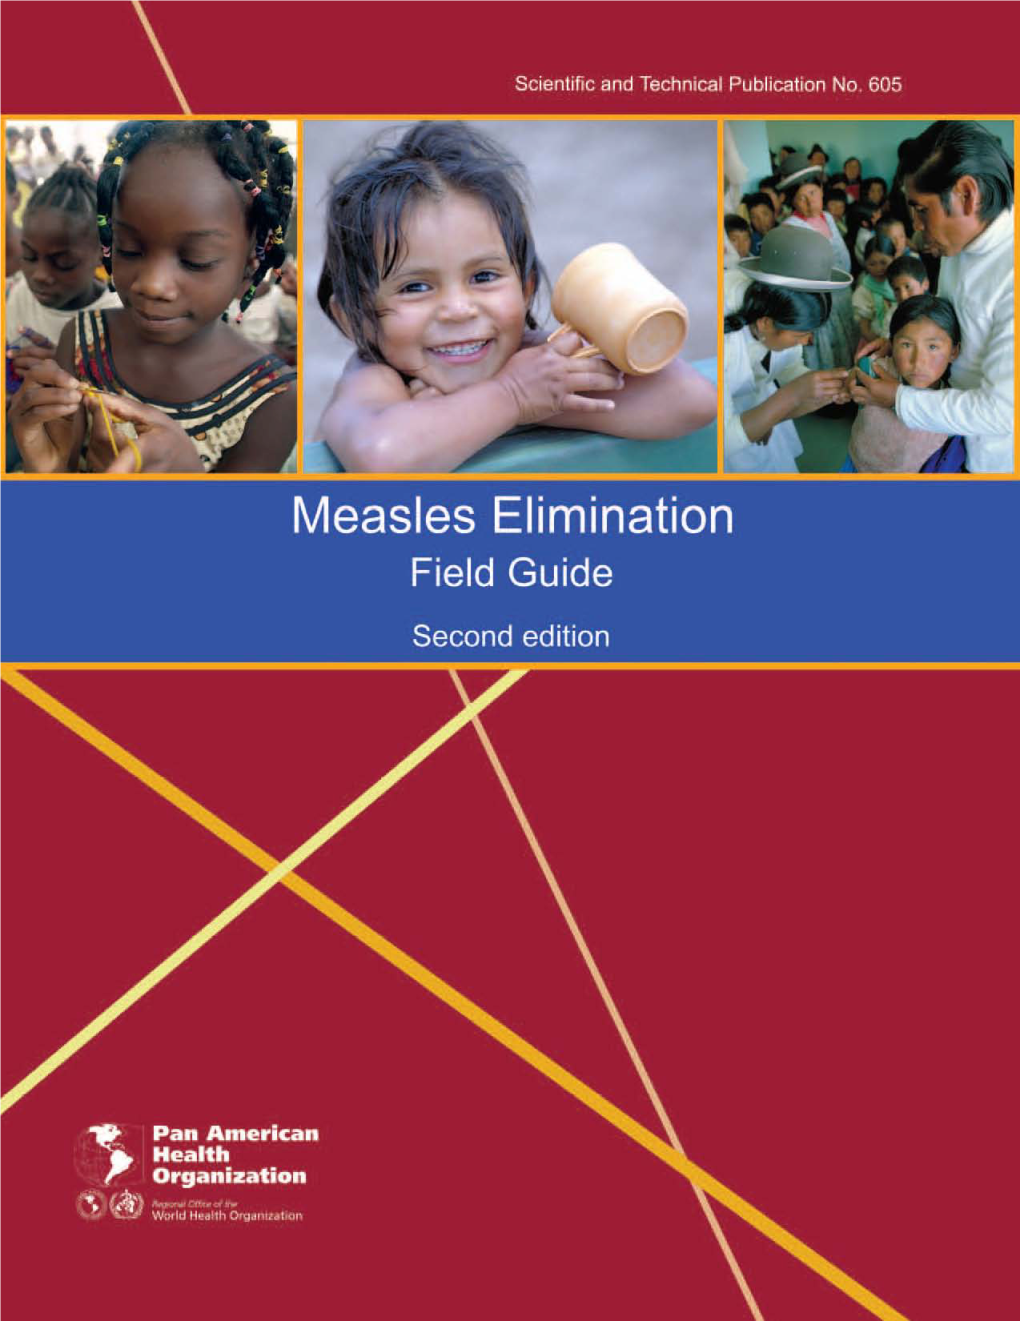 Measles Elimination Field Guide, Second Edition, 2005